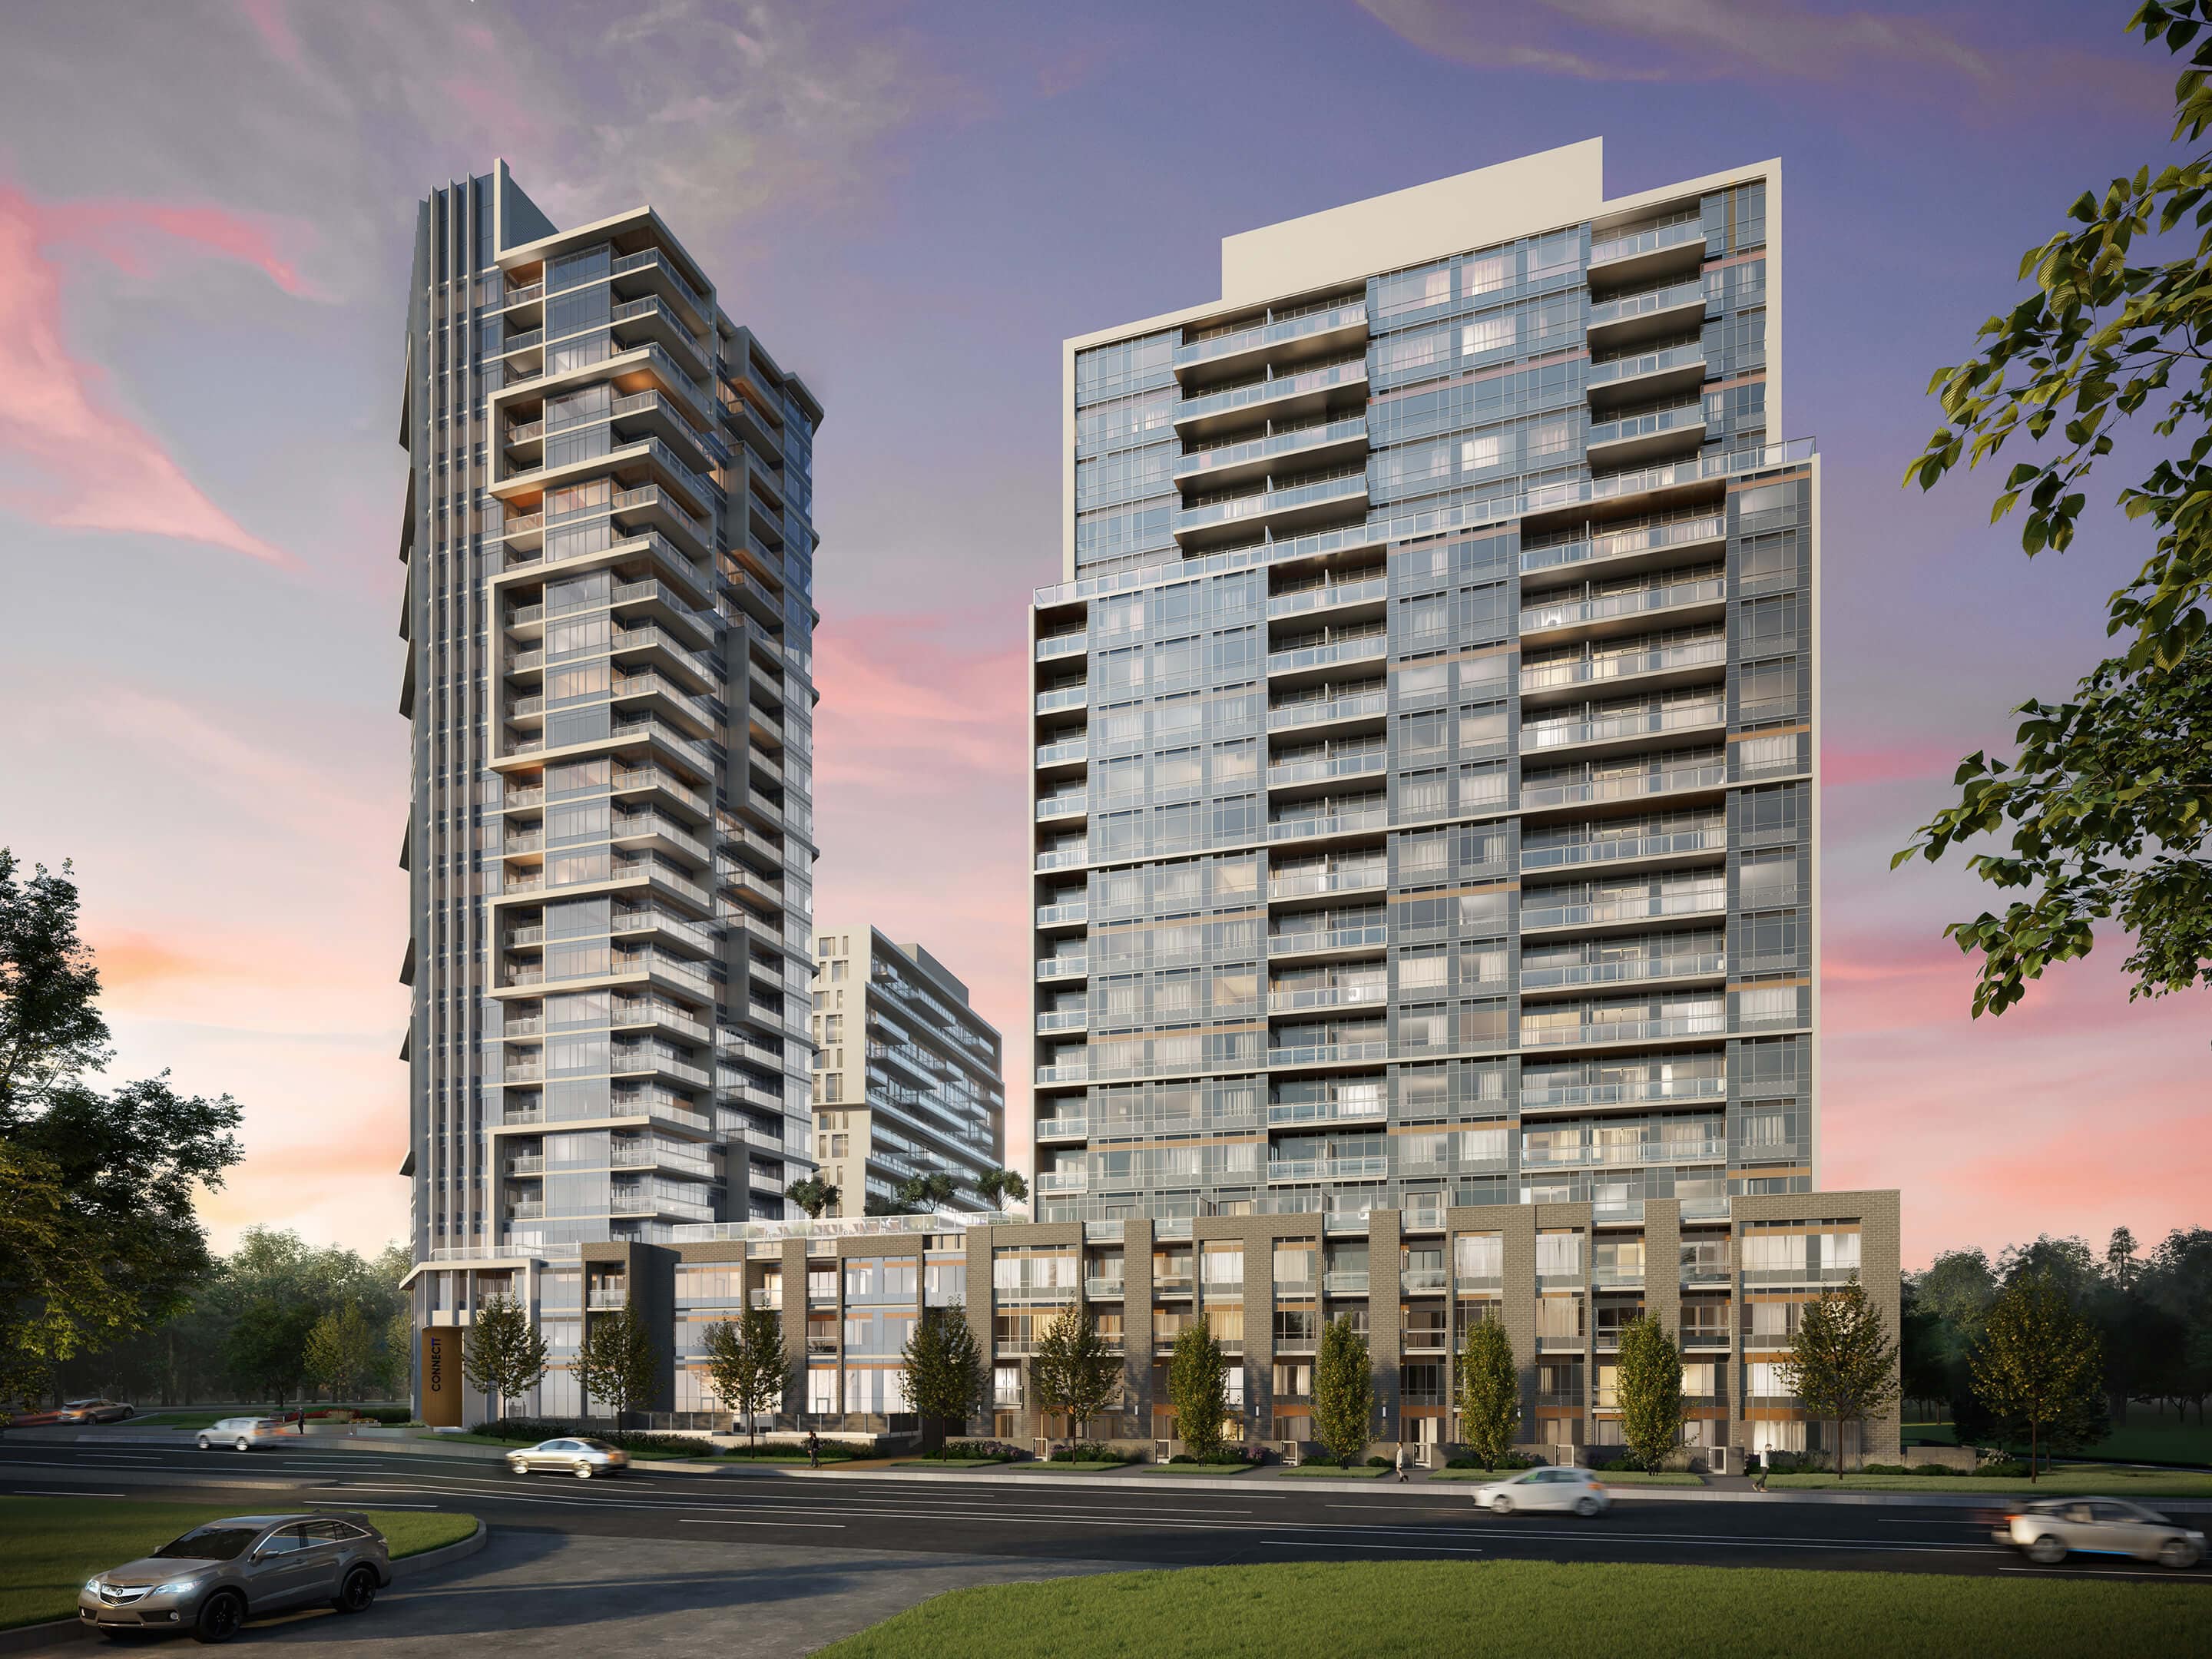 Connectt Condos 2 exterior image by lindvest-min